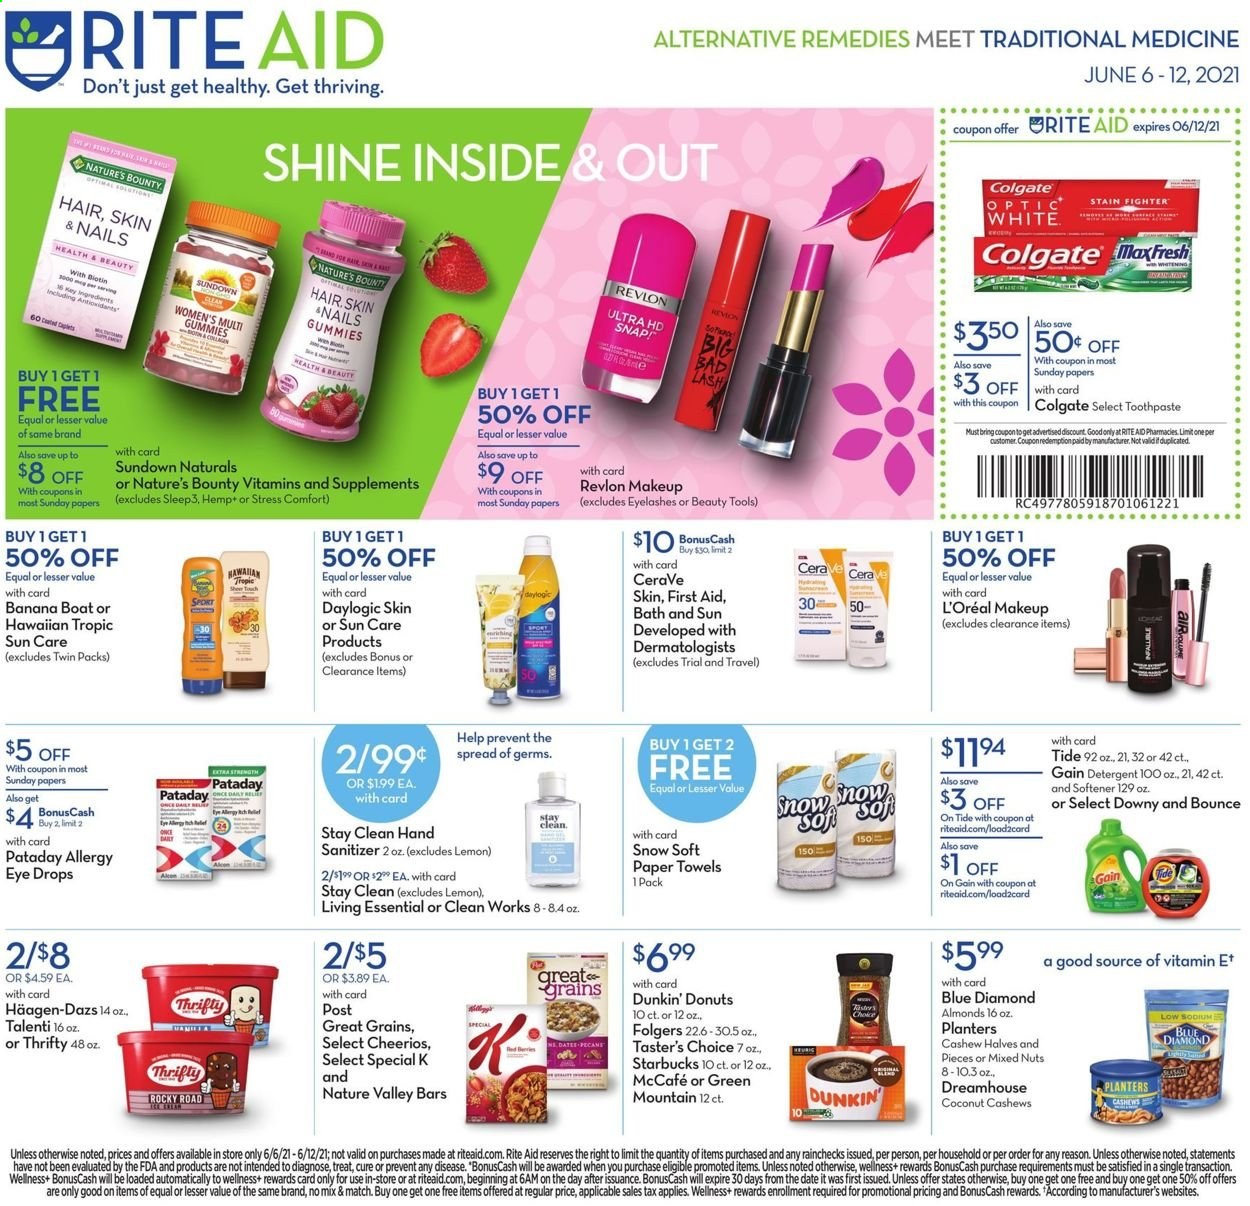 thumbnail - RITE AID Flyer - 06/06/2021 - 06/12/2021 - Sales products - Häagen-Dazs, Talenti Gelato, donut, Cheerios, Nature Valley, almonds, cashews, mixed nuts, Planters, Blue Diamond, Starbucks, Folgers, McCafe, Dunkin' Donuts, Green Mountain, kitchen towels, paper towels, detergent, Gain, Tide, fabric softener, Bounce, Colgate, toothpaste, CeraVe, L’Oréal, Daylogic, Revlon, Brite, hand sanitizer, makeup, eyelashes, Biotin, Nature's Bounty, Sundown Naturals, eye drops. Page 1.